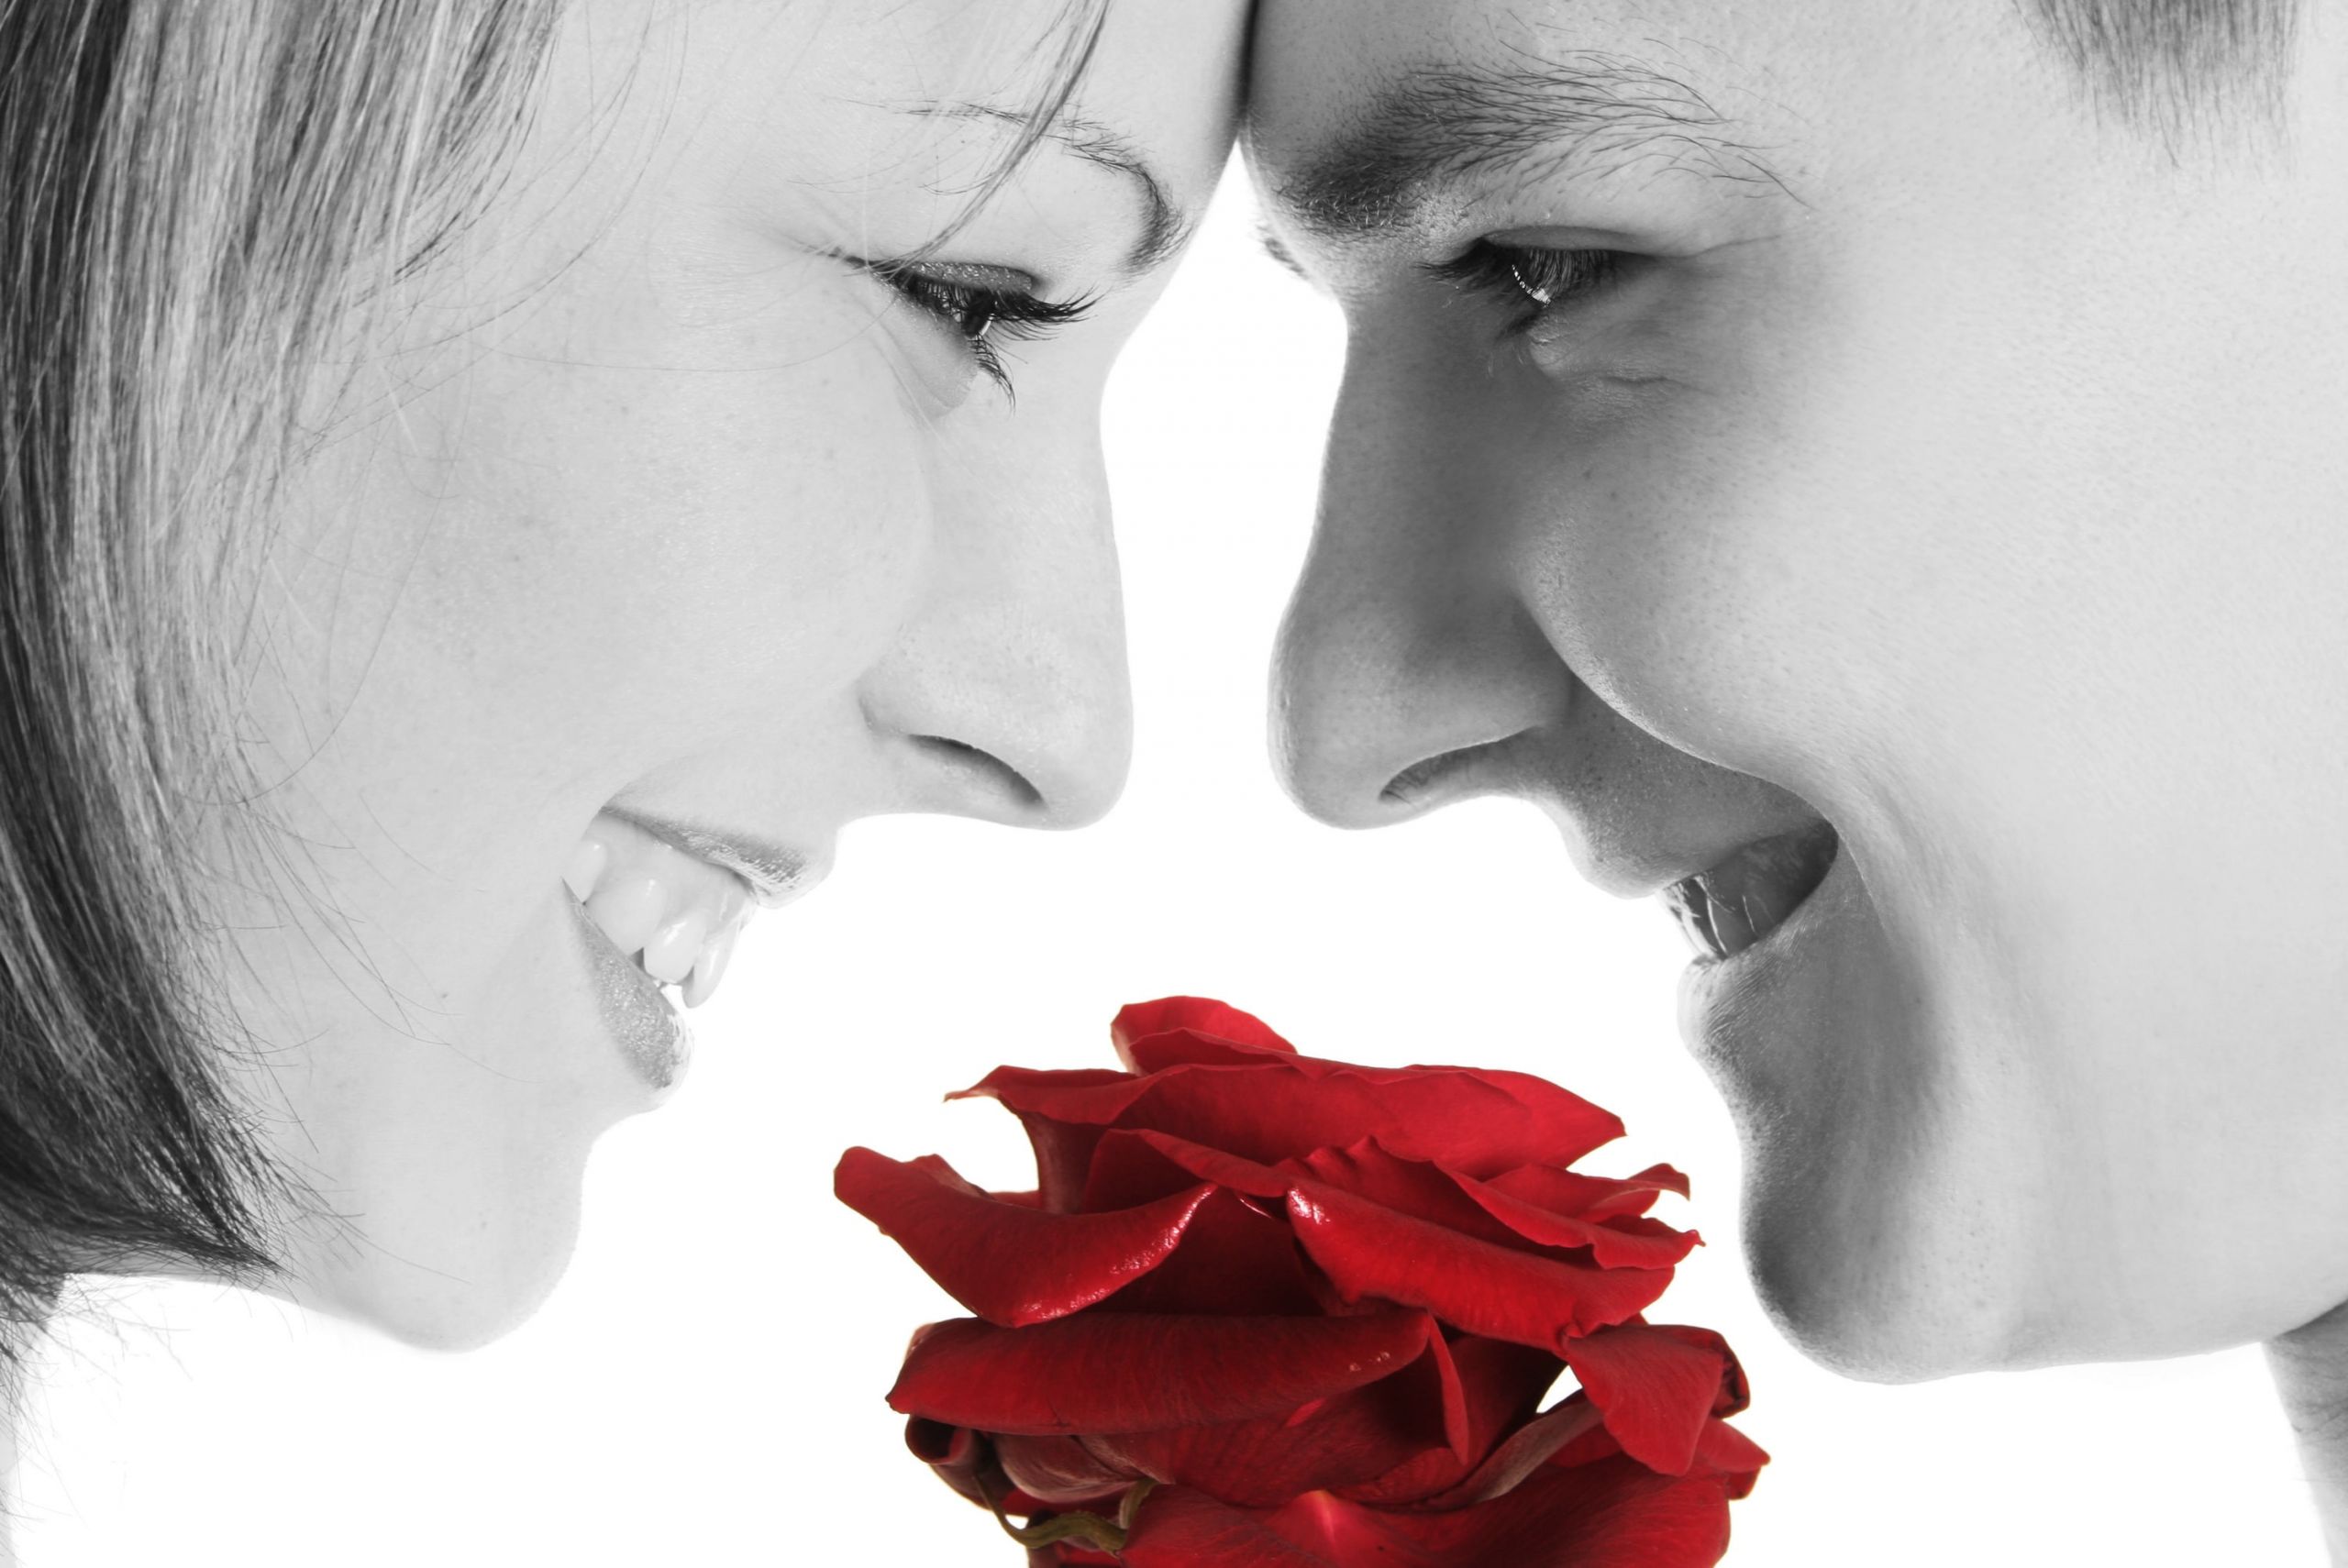 Free Gift Ideas For Girlfriend
 10 Romantic & Inexpensive Gift Ideas for Your Girlfriend